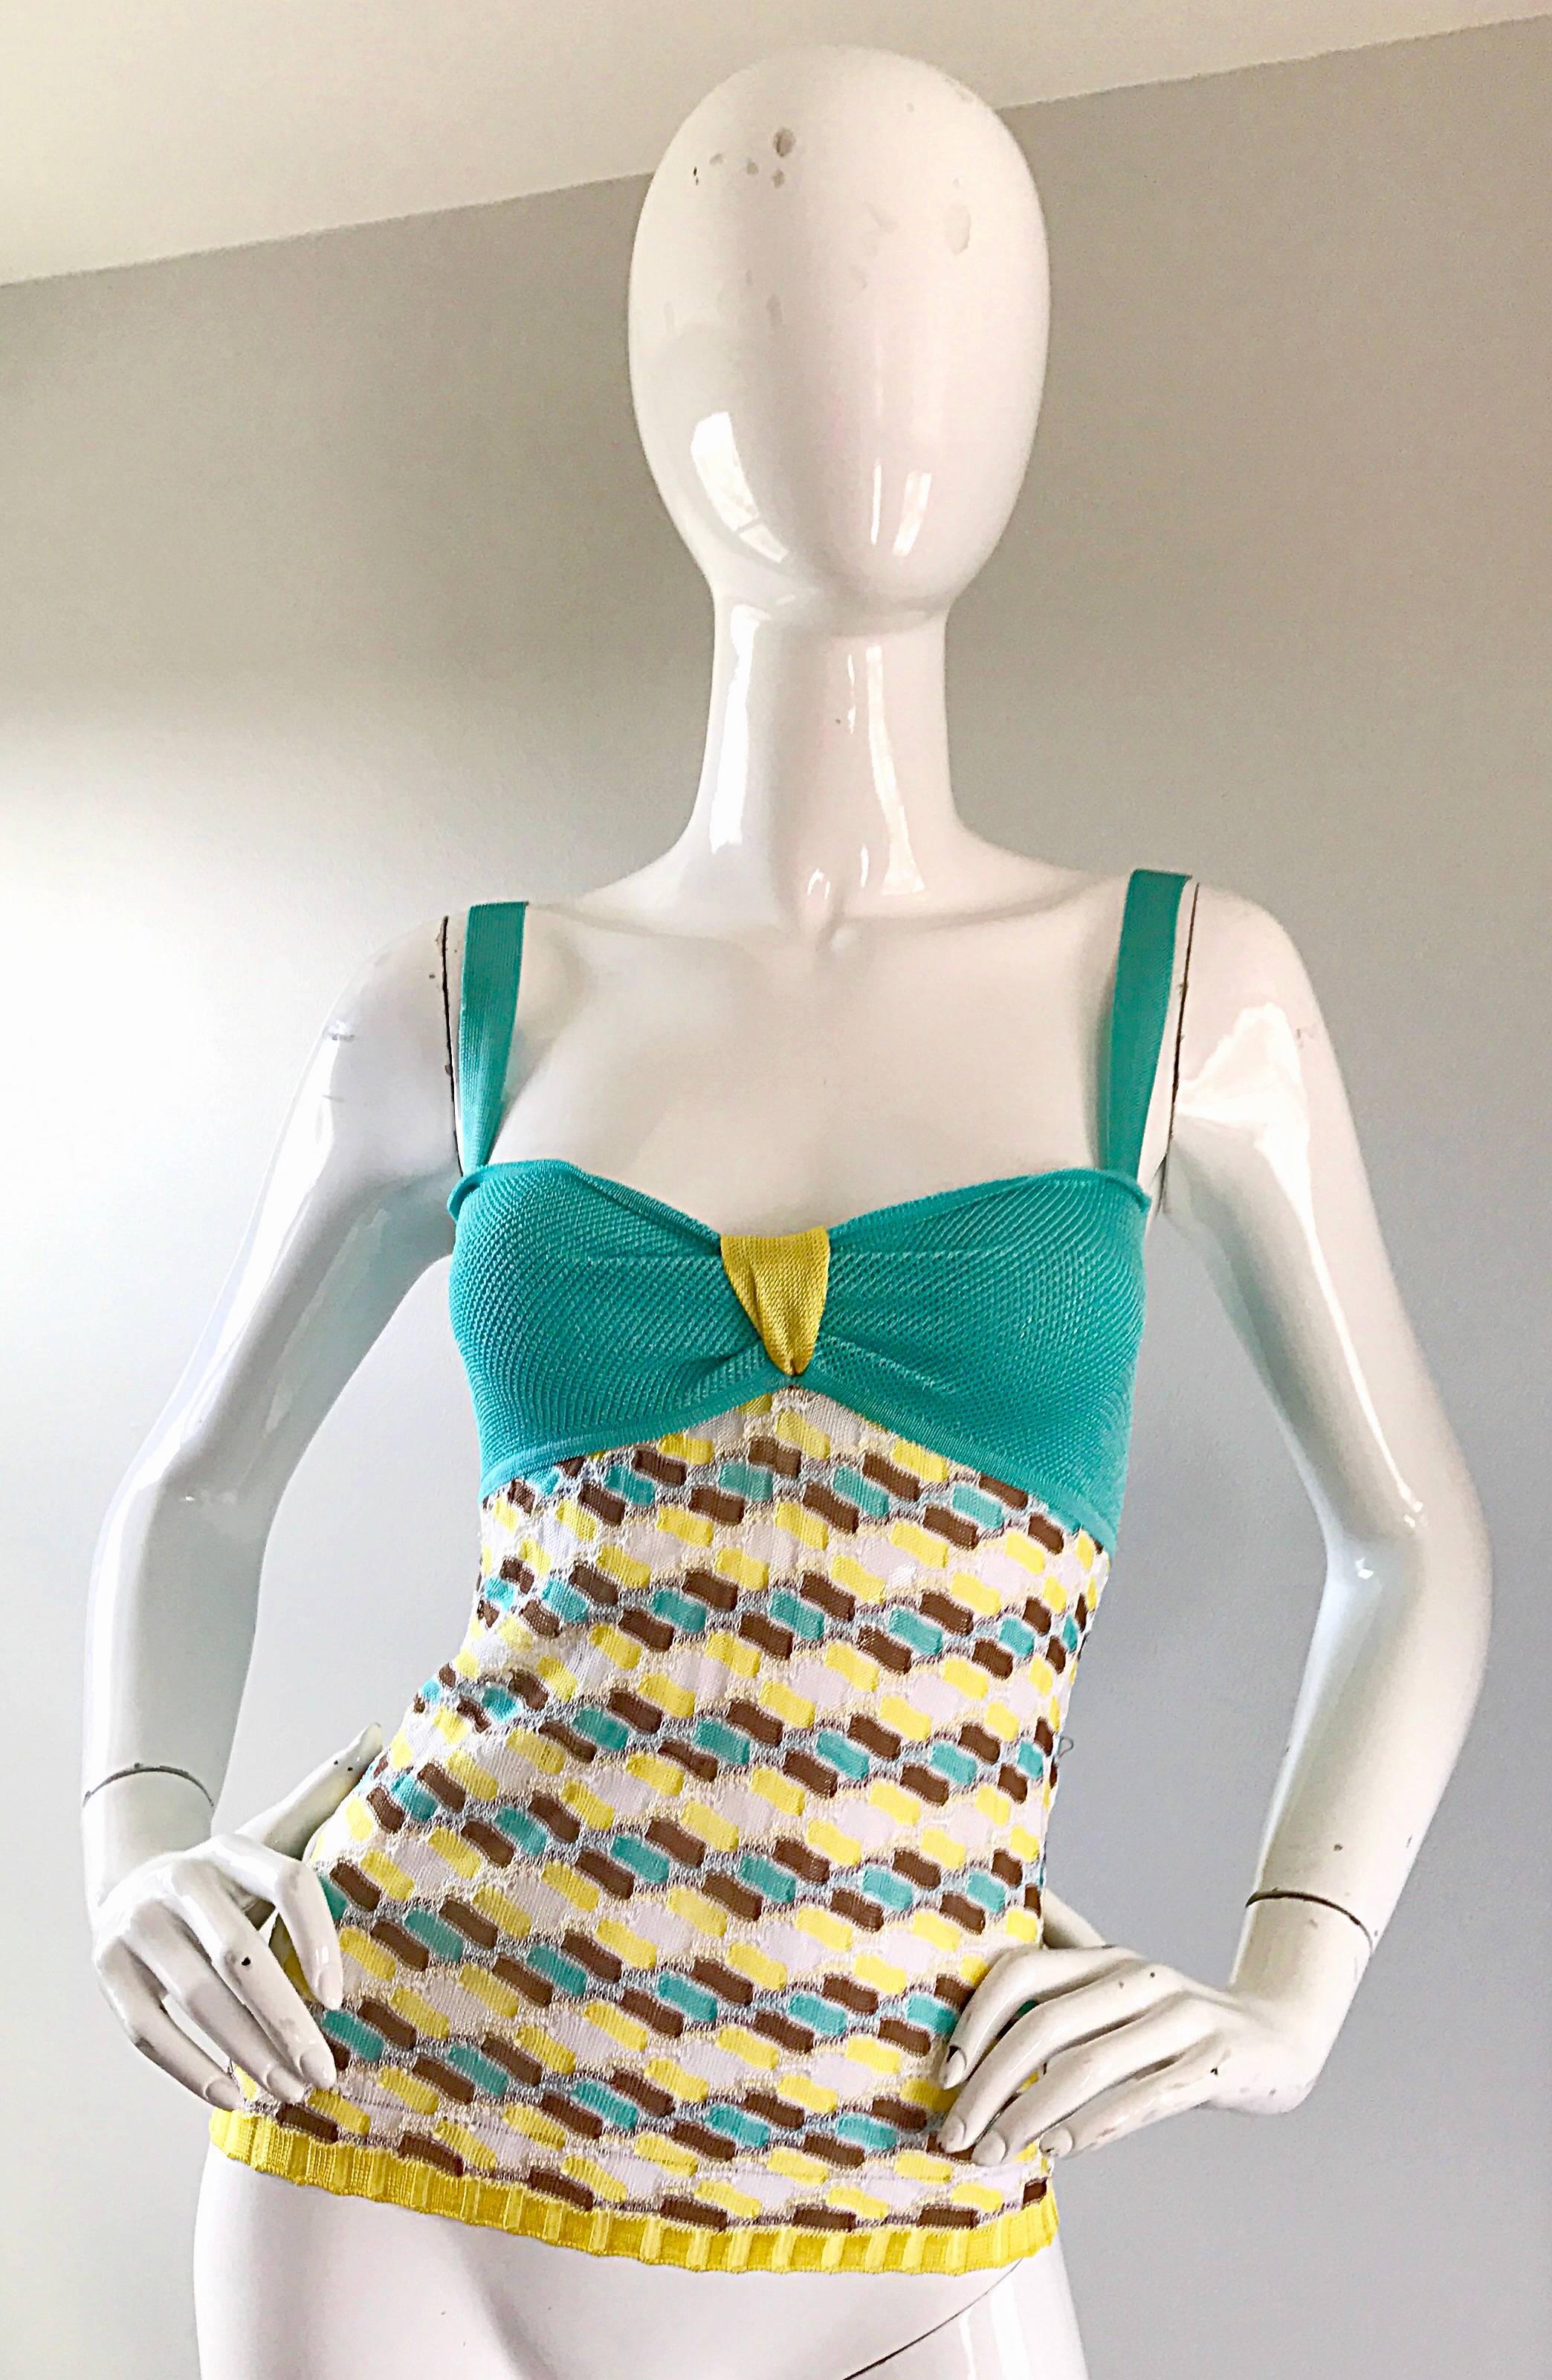 Chic vintage late 1990s MISSONI knit rayon sleeveless crochet tank top! Features signature mosaic prints in vibrant teal blue, yellow, brown and white. Turquoise bodice, with a neon yellow 'knot' at center bust. Can easily be dress up or down. Great